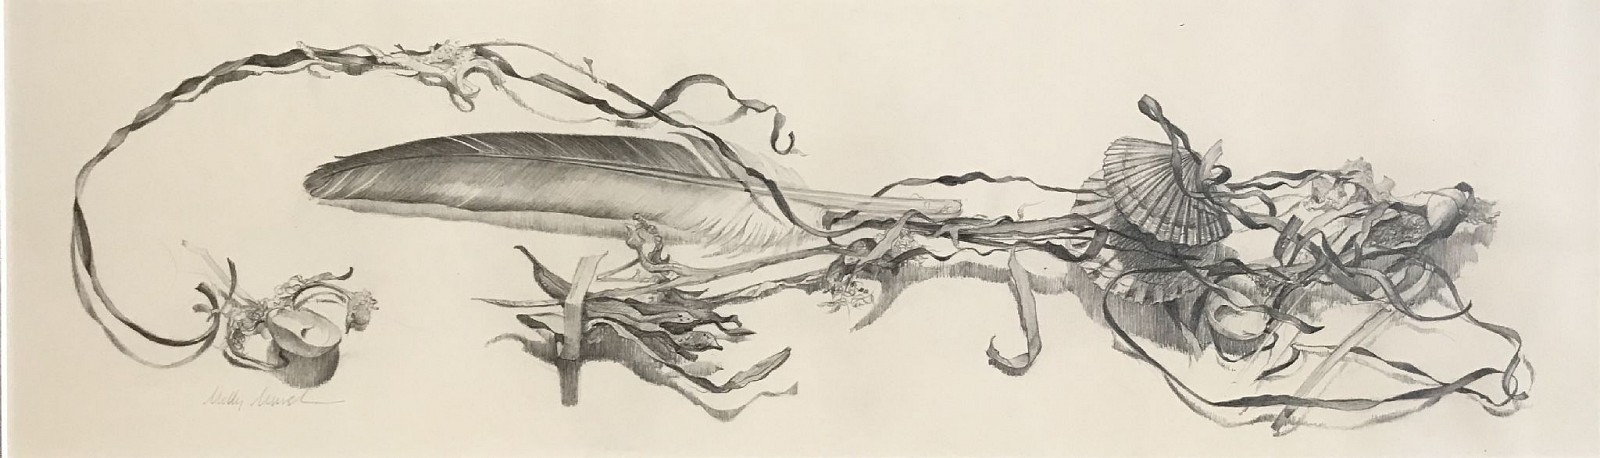 Molly Marsh, Feathers, Scallops
Sea Scene #75
pencil on paper, 5" x 17 1/2" ss
signed, Molly Marsh, lower left
JCA 5727
$650